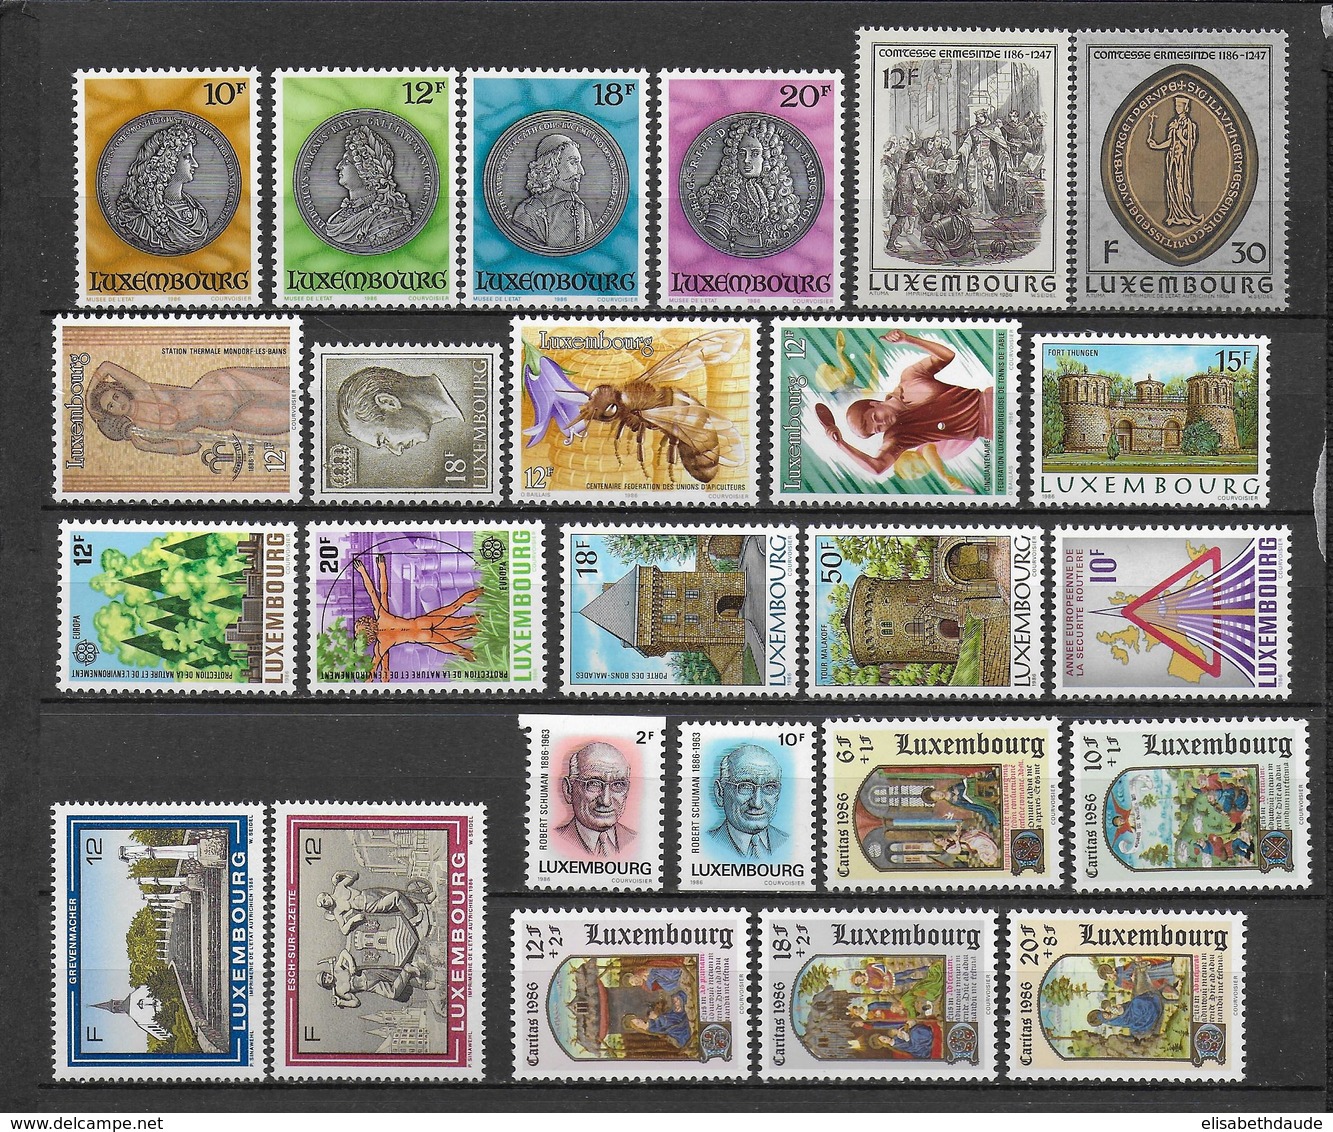 LUXEMBOURG - ANNEE COMPLETE 1986 ** MNH - - Annate Complete